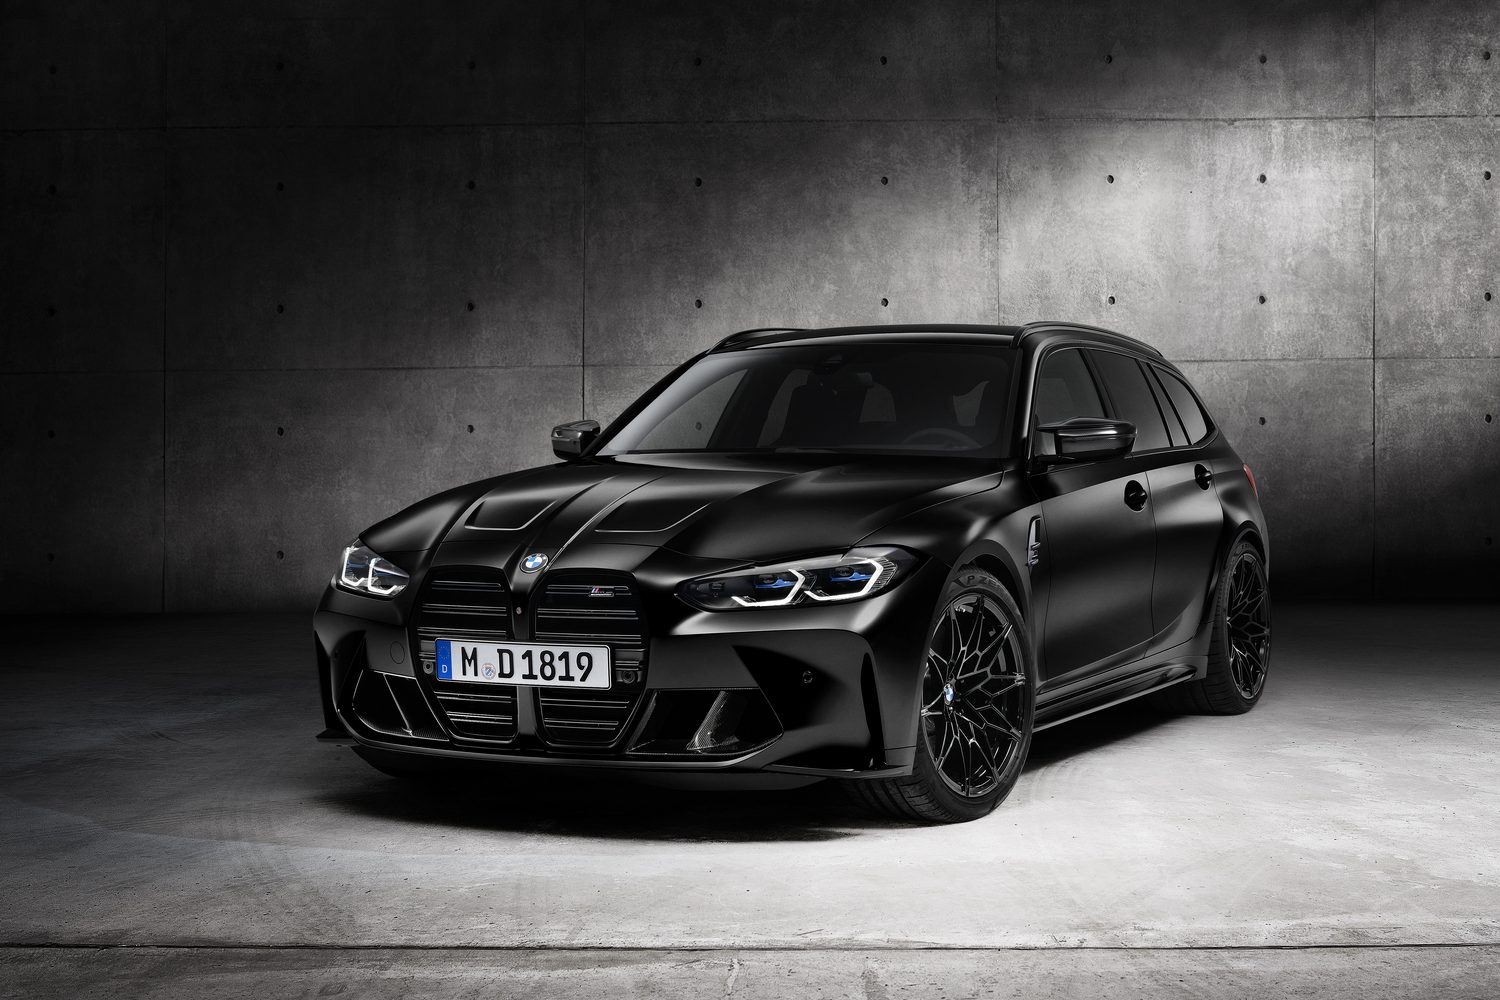 BMW reveals long-awaited M3 Touring estate. Image by BMW.